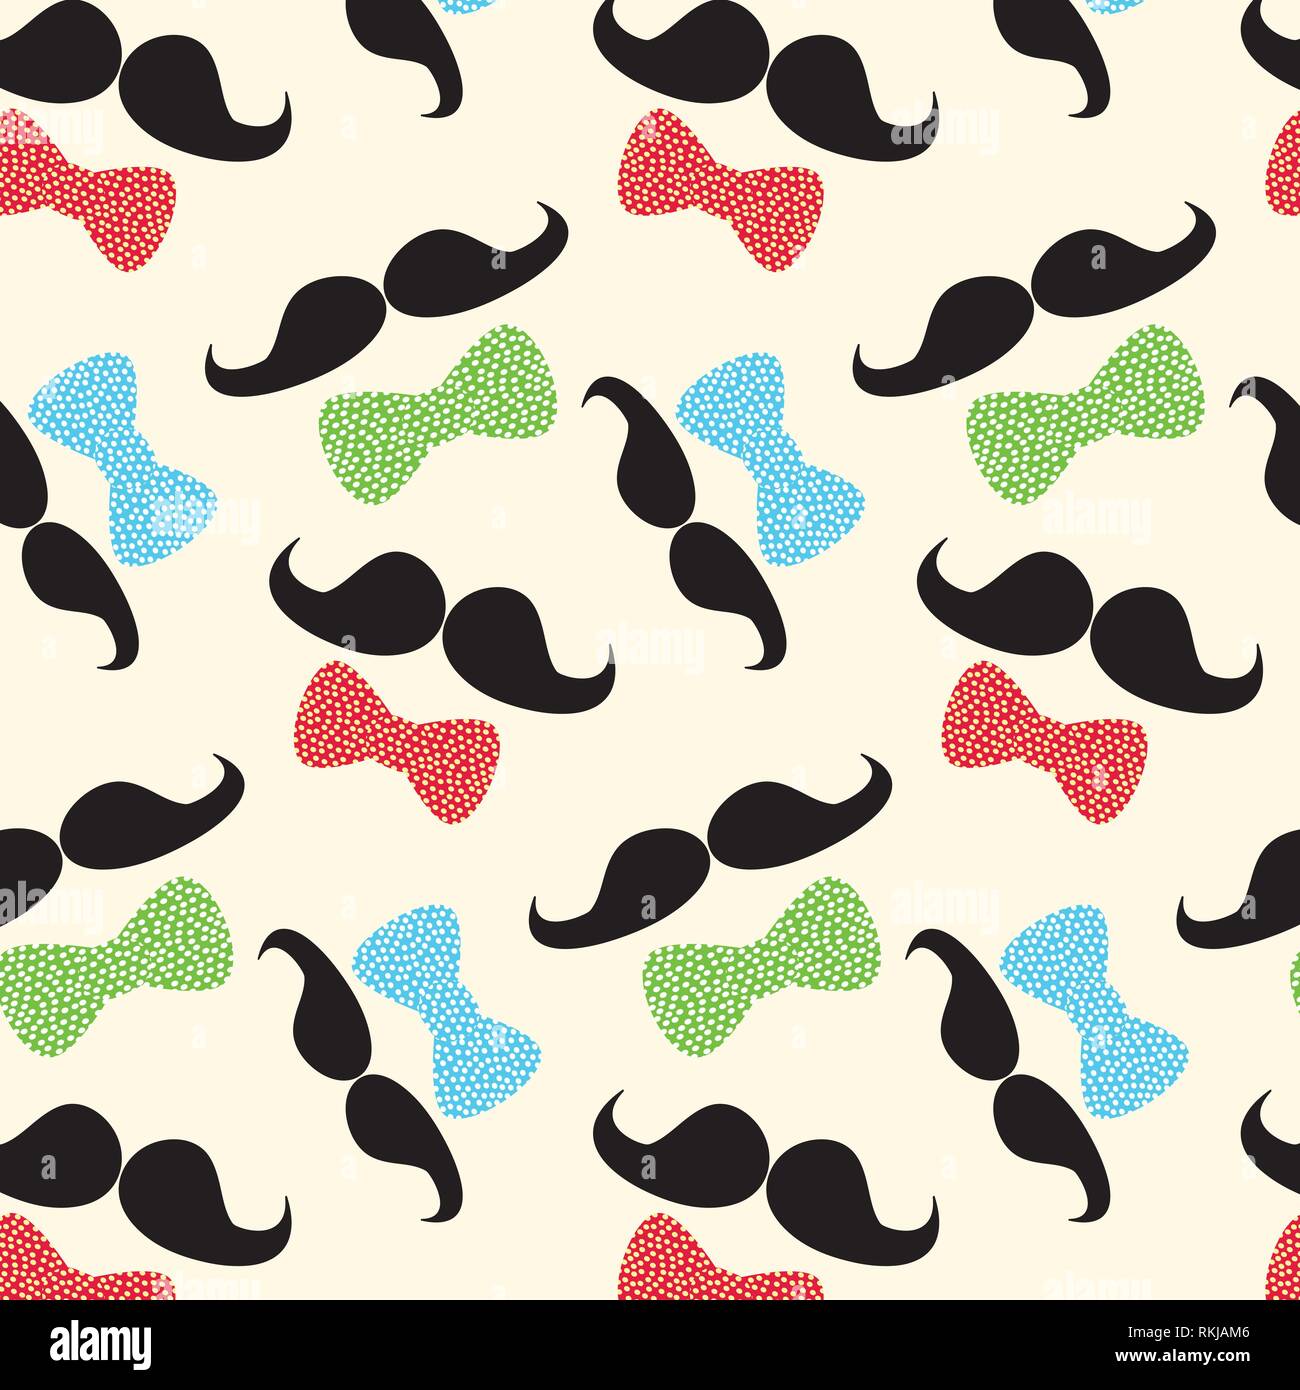 Mustache and bow tie vector pattern illustration. Fathers day card template Stock Vector